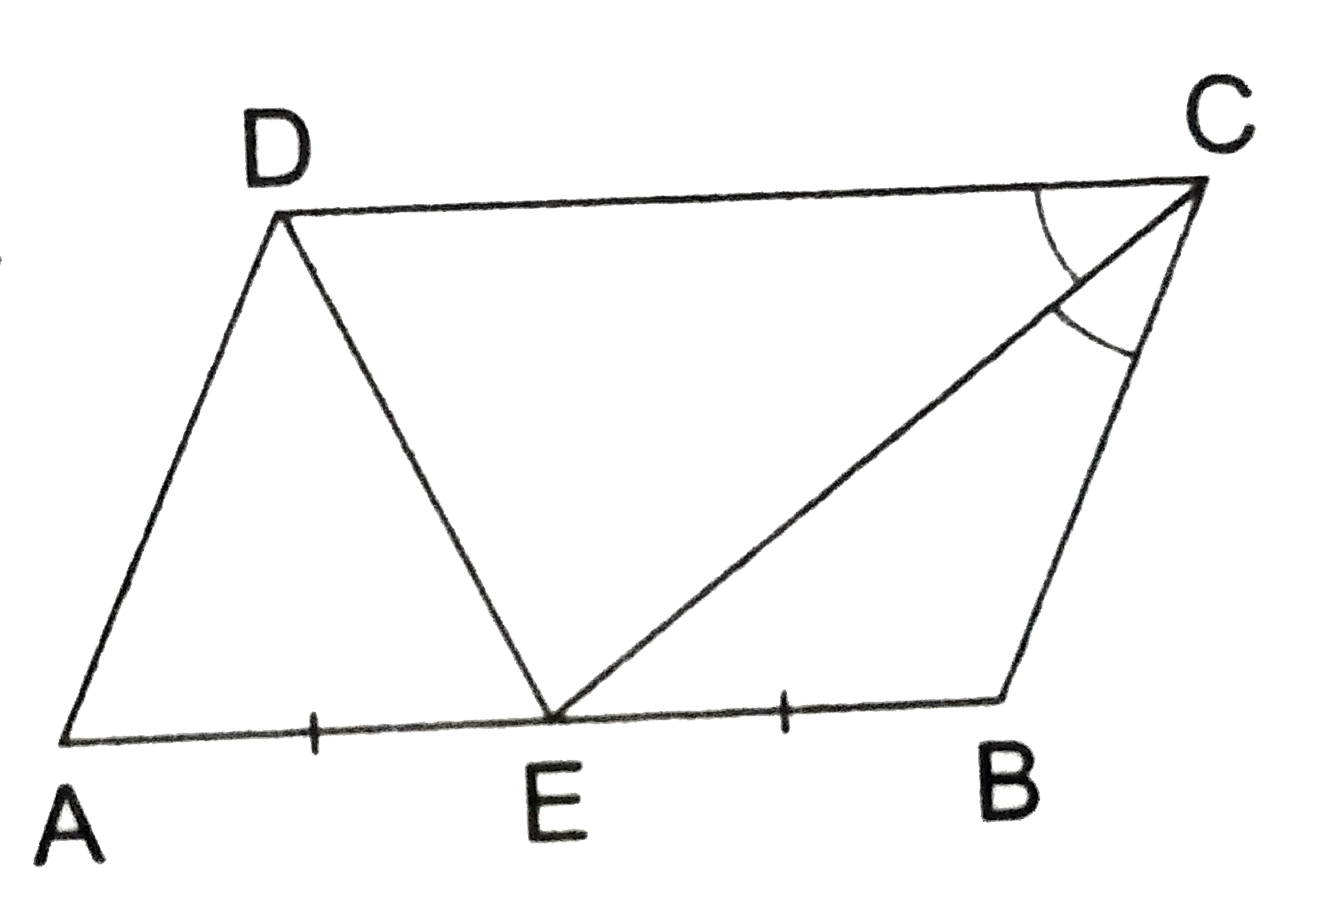 In the adjoining figure, ABCD is a parallelogram, E is midpoint of AB and CE bisects  angle BCD. Prove that       (i) AE = AD (ii) DE bisects  angle ADC  and  (iii)  angle DEC = 90^(@).